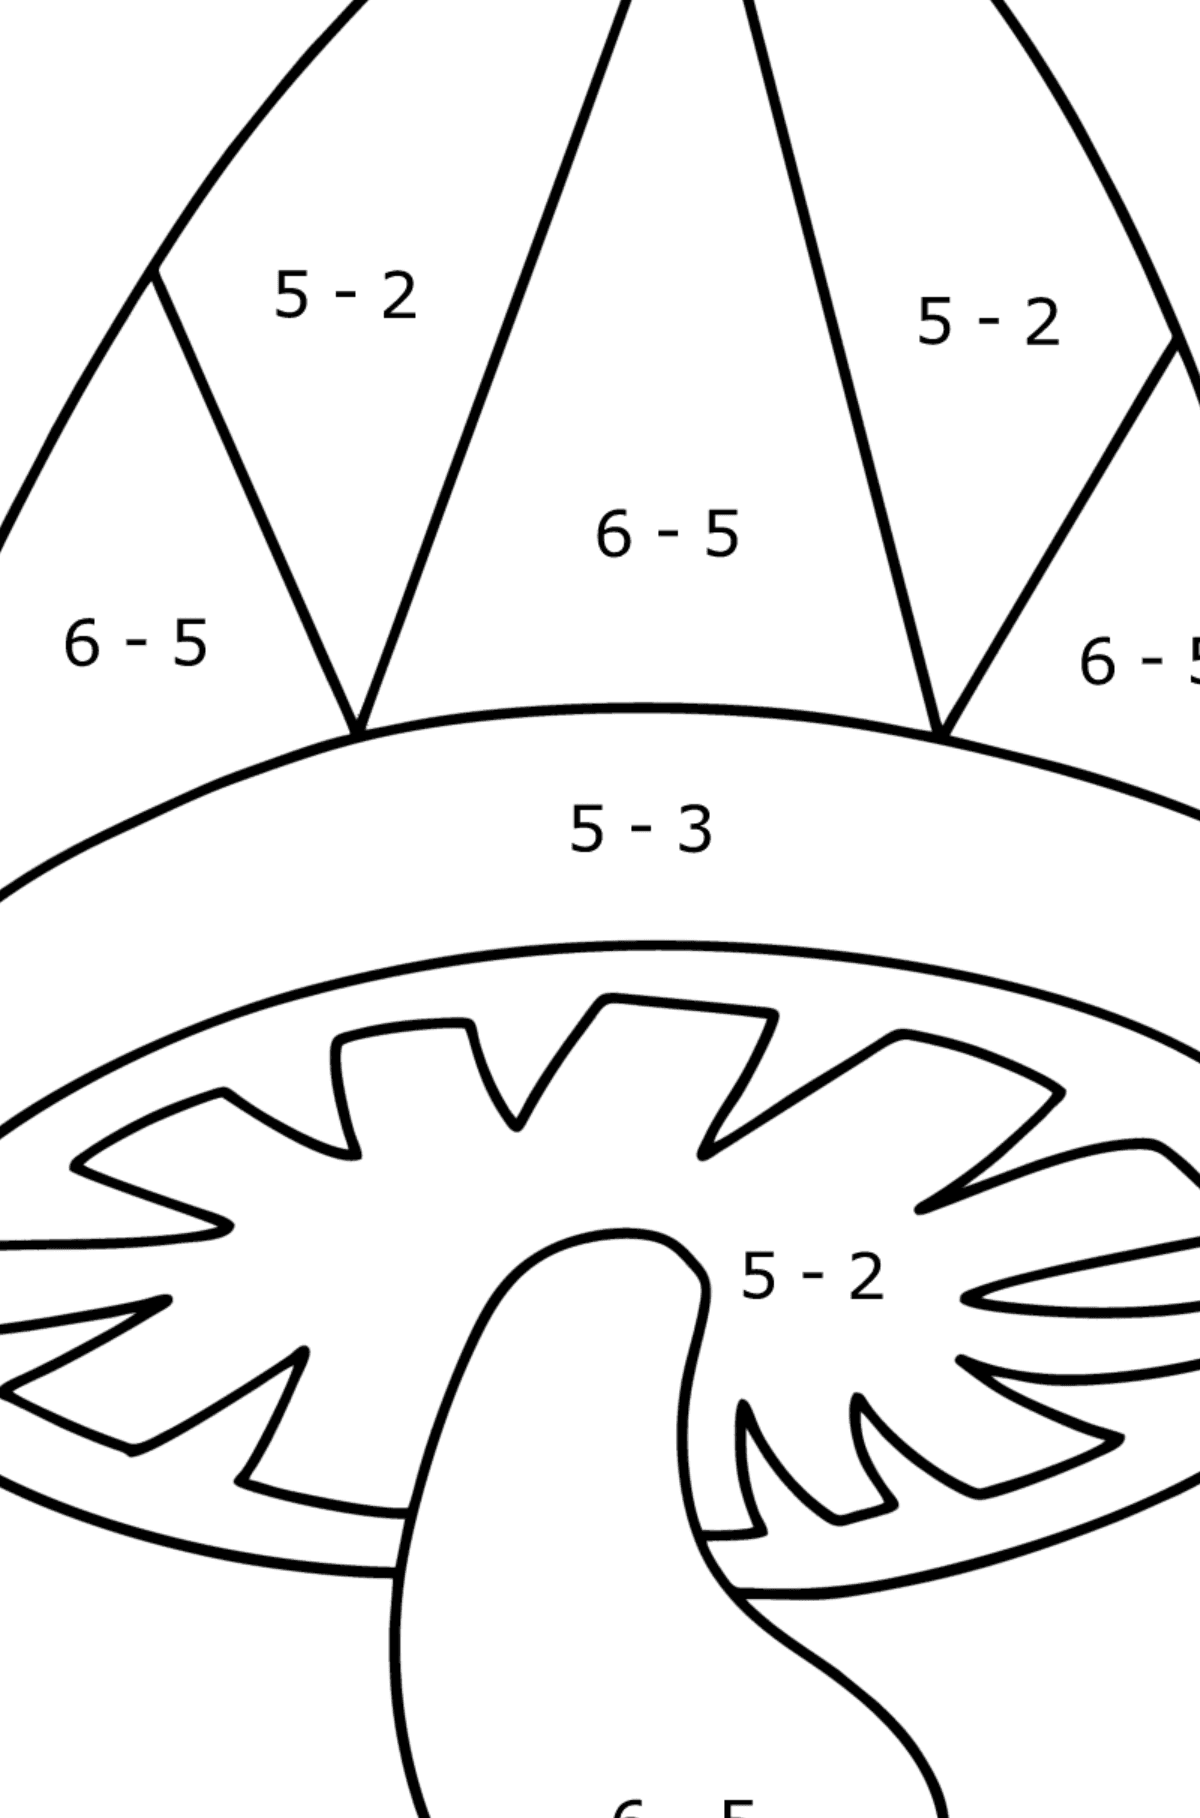 Simple Zen mushroom coloring page - Math Coloring - Subtraction for Kids